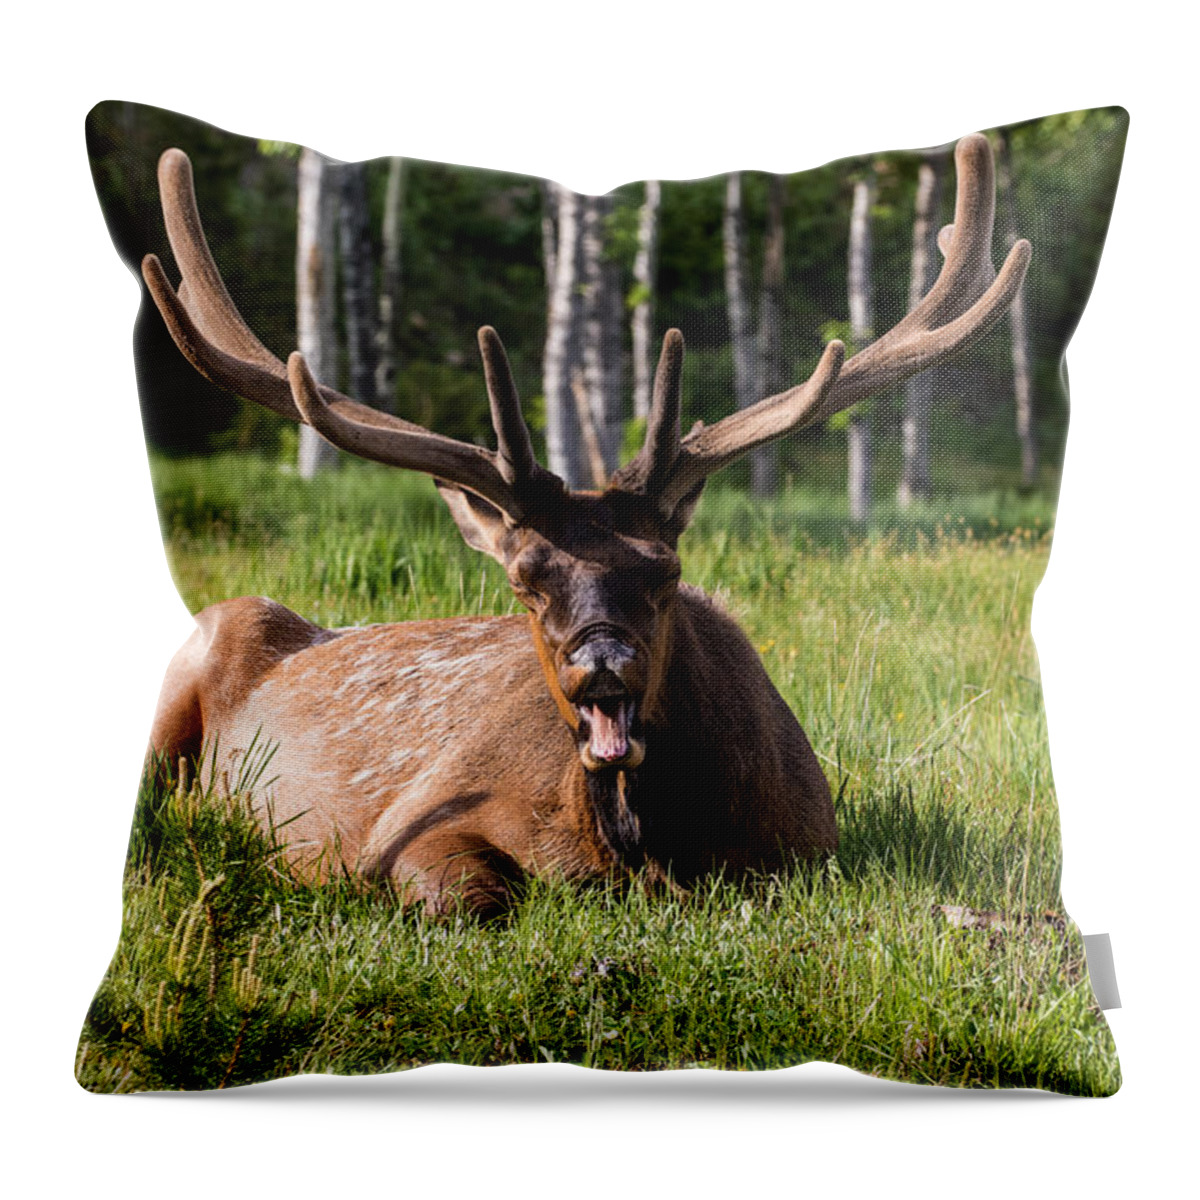 Bull Elk Throw Pillow featuring the photograph Yawning Bull Elk by Mindy Musick King